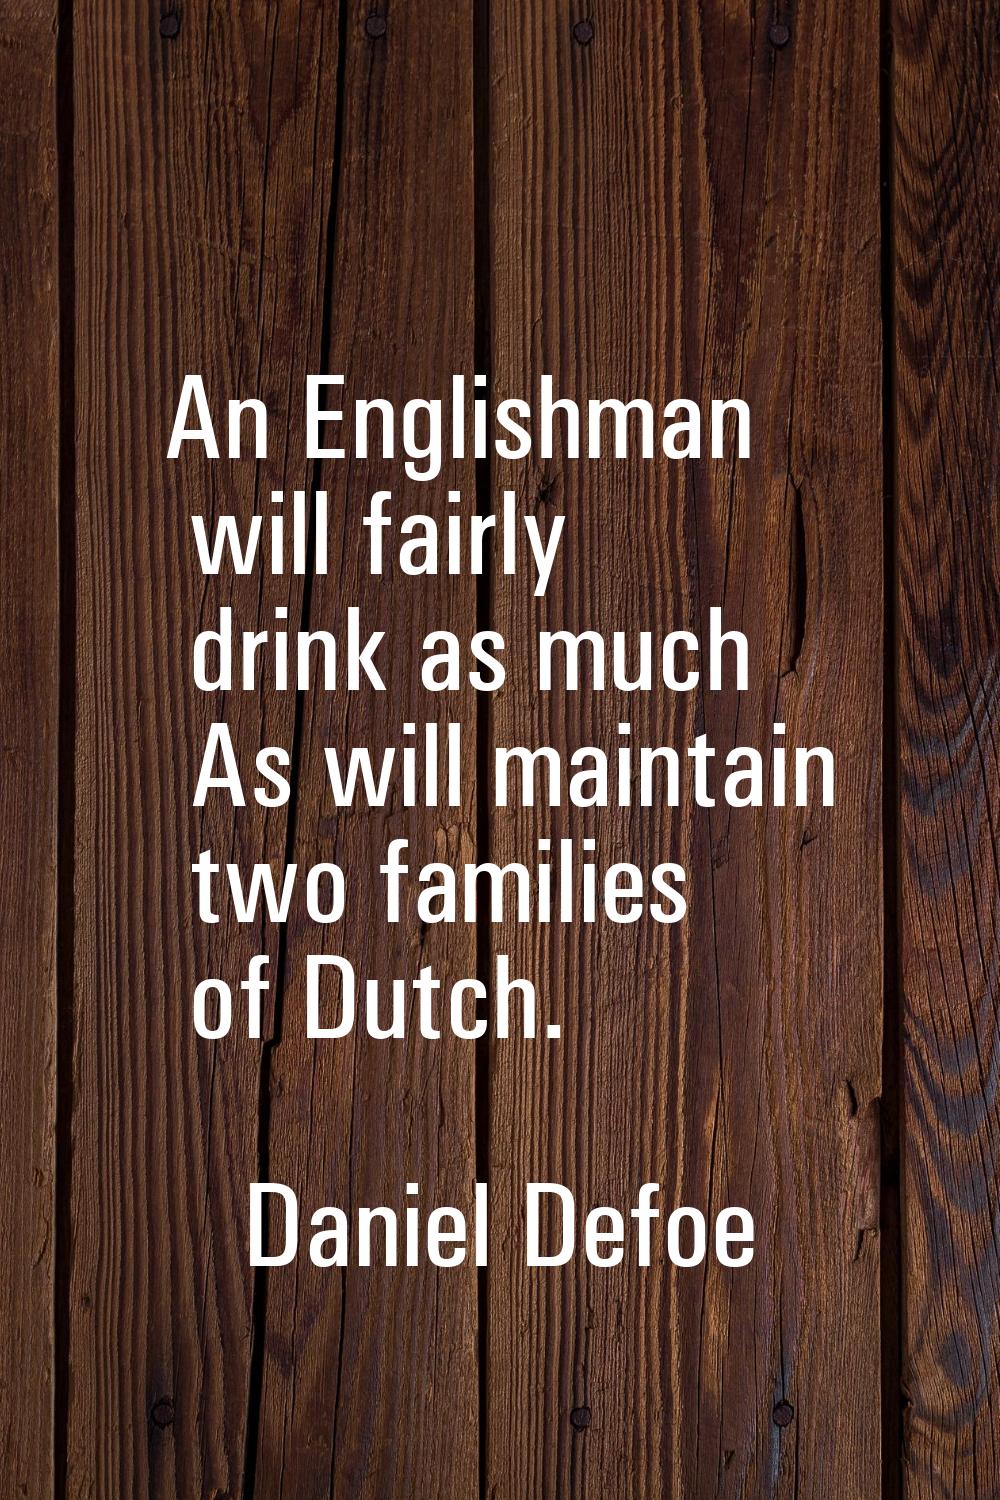 An Englishman will fairly drink as much As will maintain two families of Dutch.